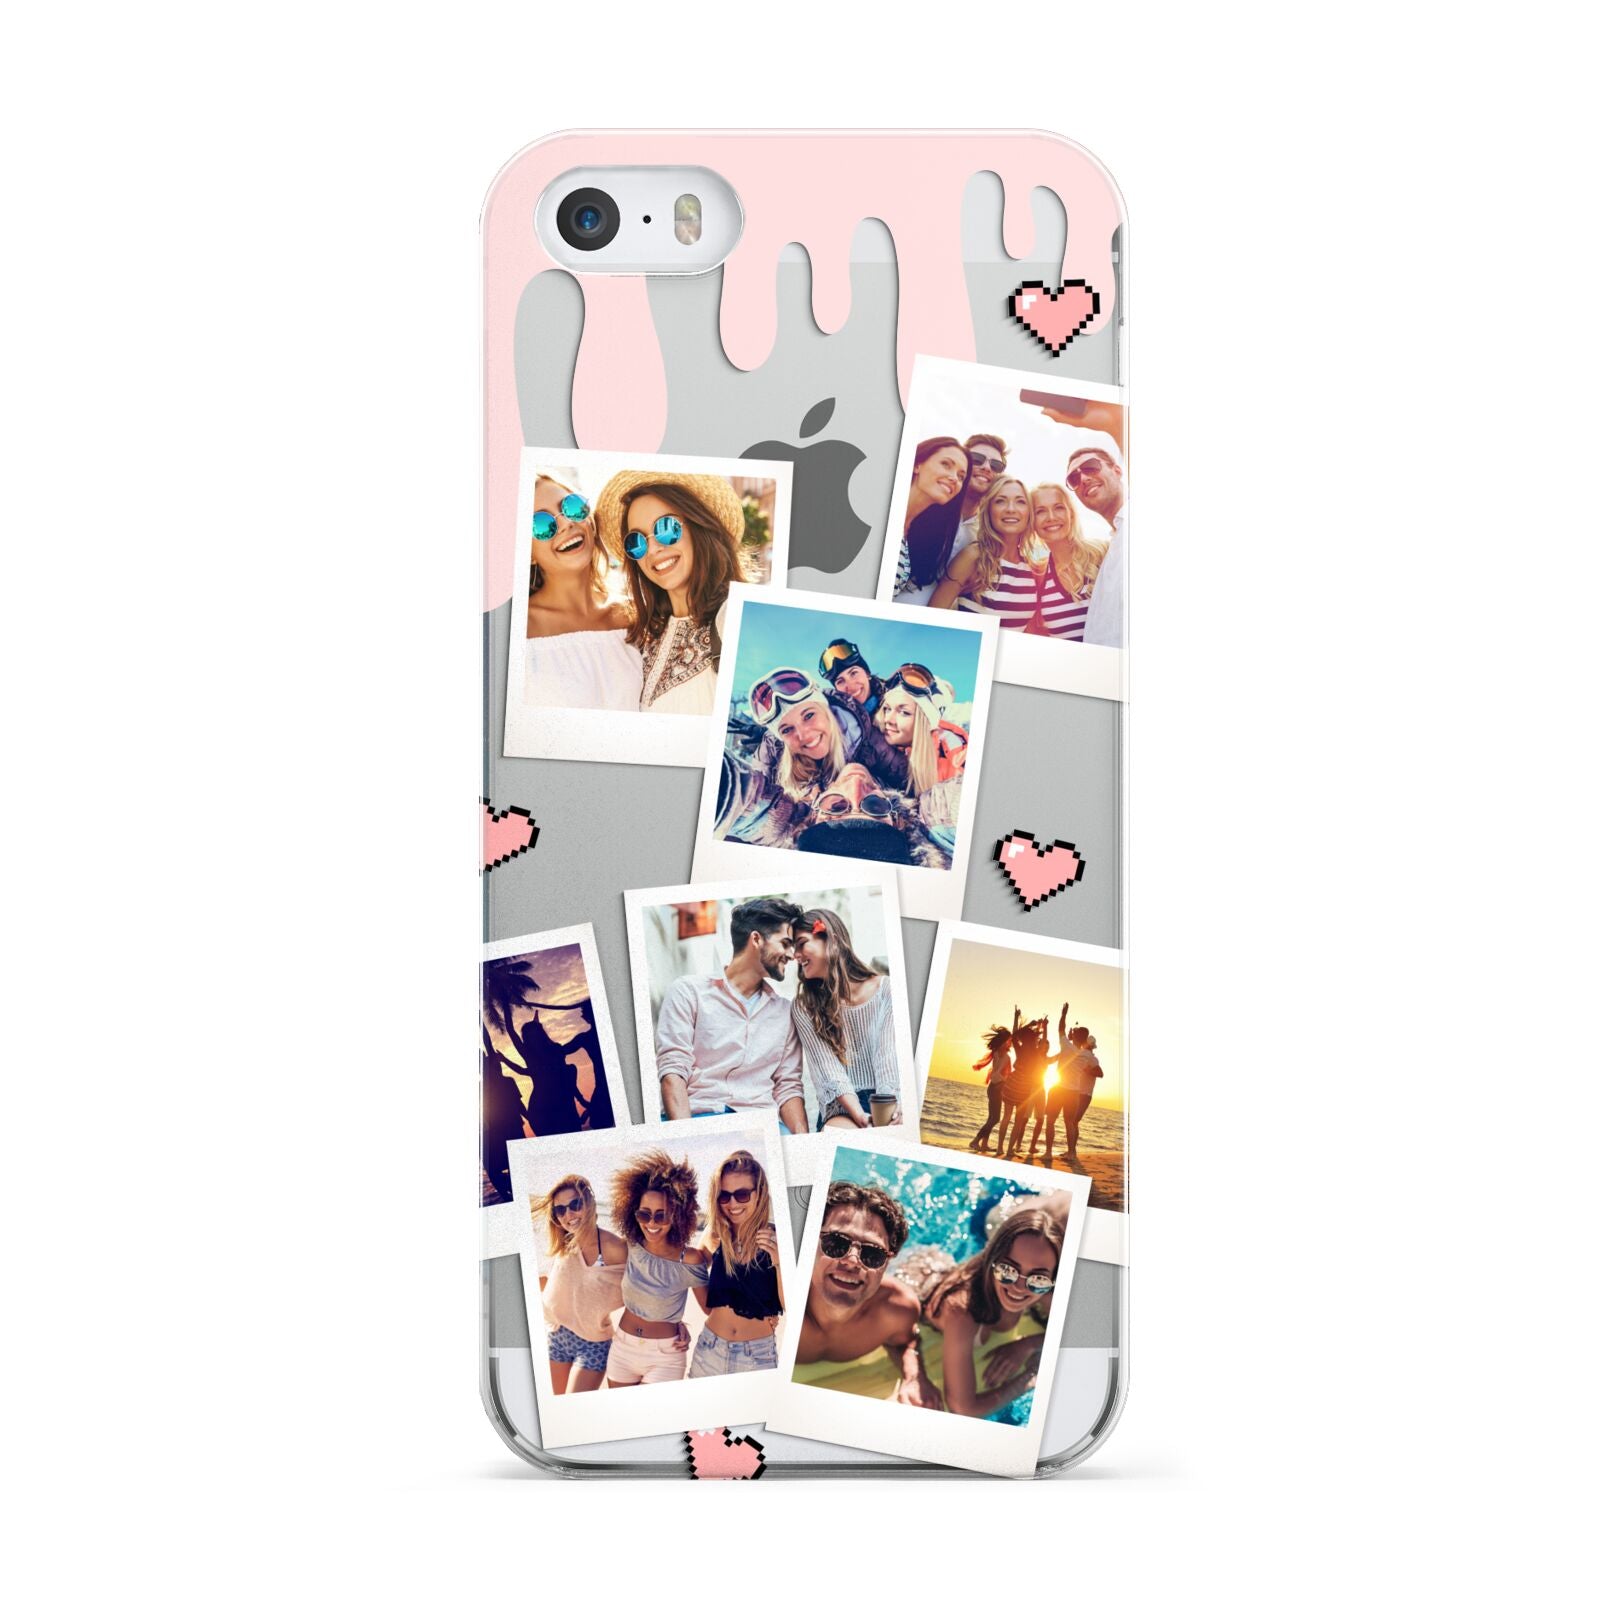 Digital Hearts Photo Upload with Text Apple iPhone 5 Case